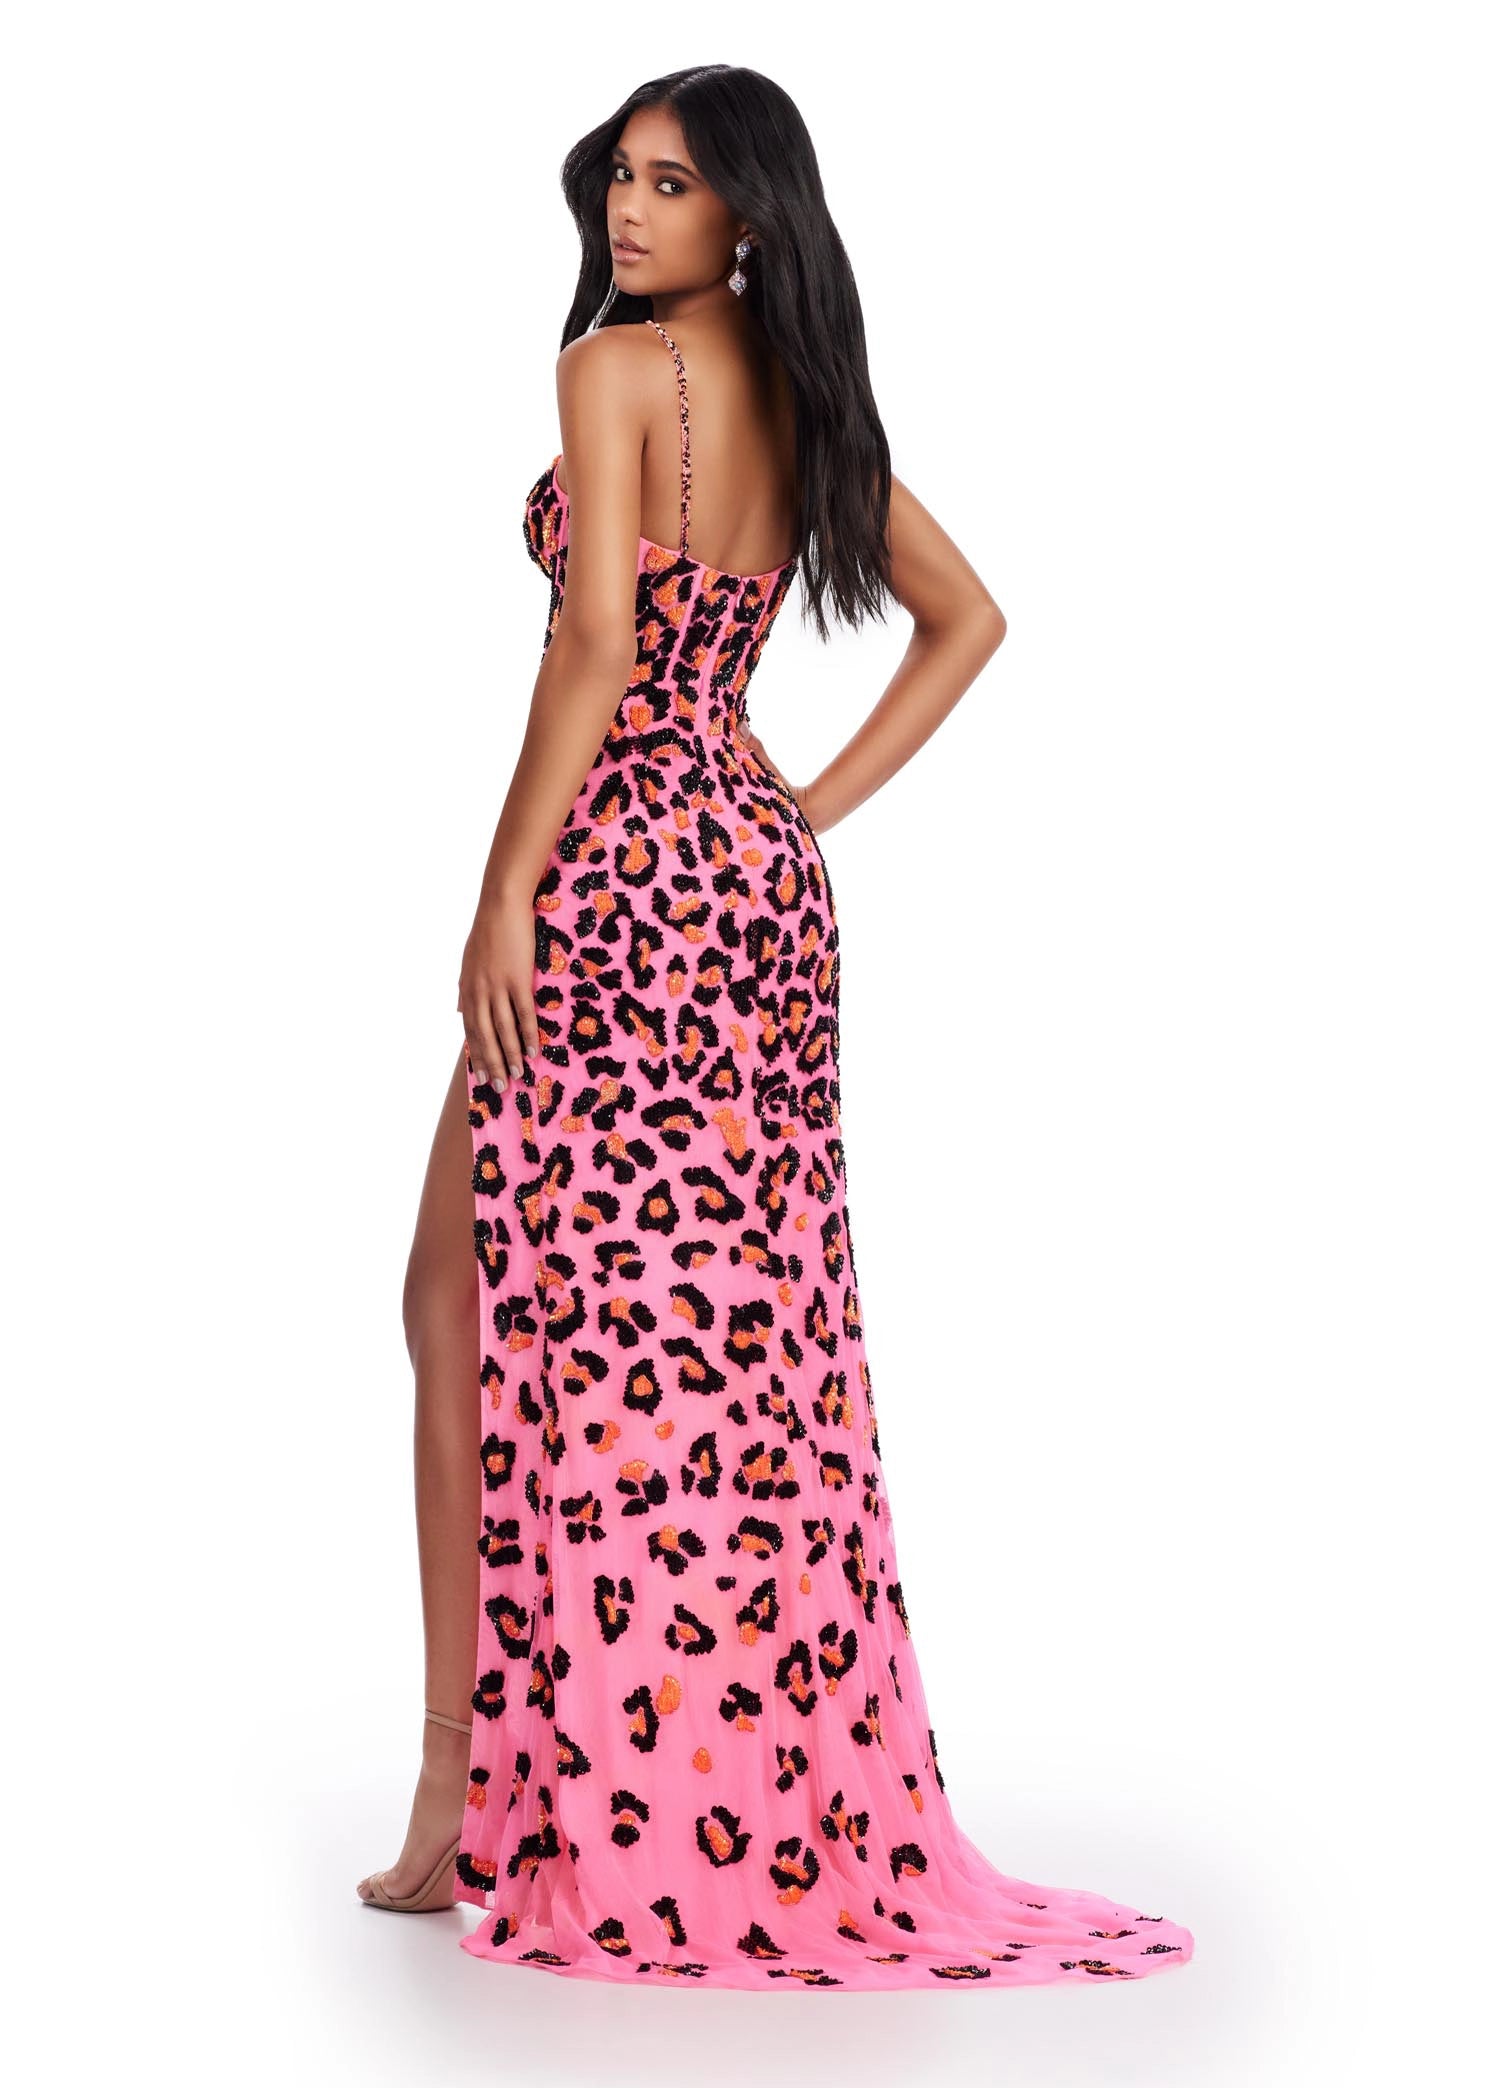 Be the belle of the ball with Ashley Lauren 11674. This beaded corset cheetah print prom dress will have you turning heads with its v-neck, floats, and slit formal gown. Stand out in sophistication and style. Who doesn't love a cheetah moment? This spaghetti strap gown is embellished in an ornate cheetah print bead pattern. The fully boned bustier is sure to provide an exceptional fit.  COLORS: Light Blue, Neon Pink